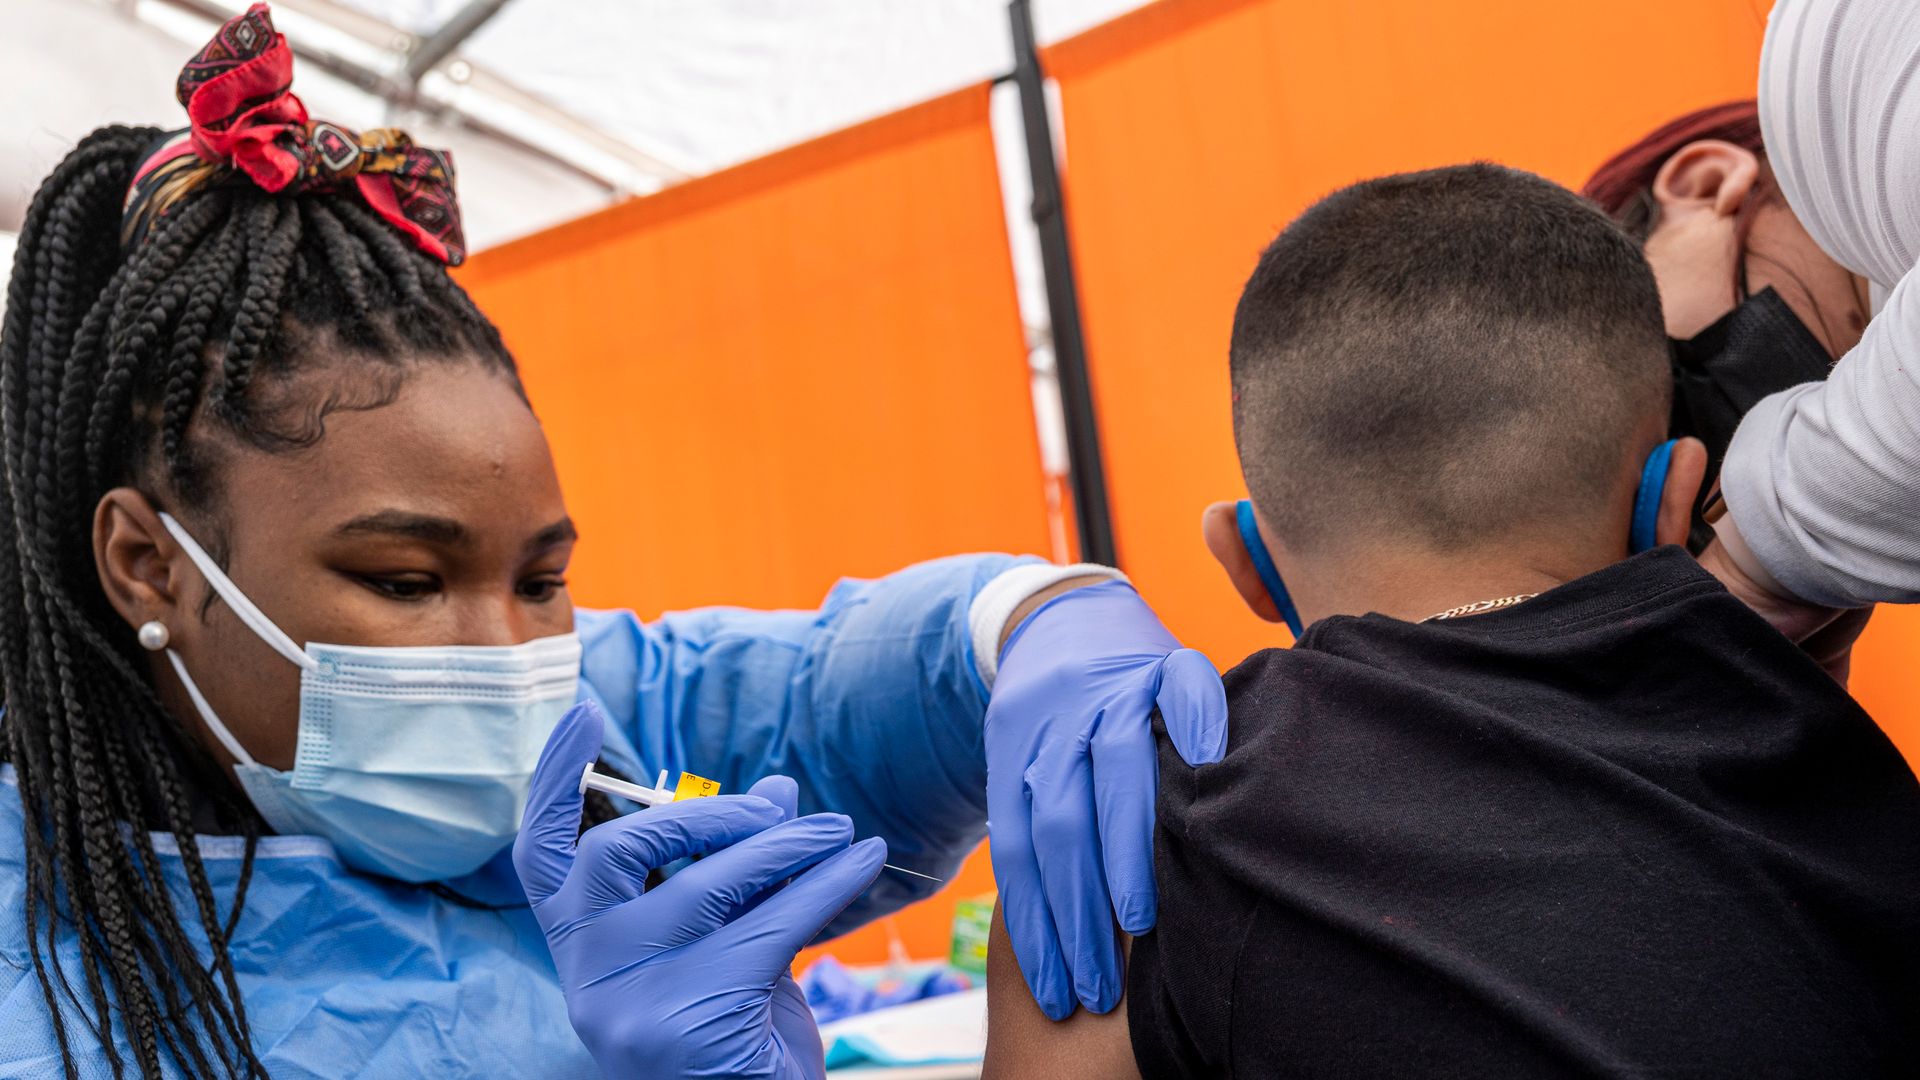  A healthcare worker administers a Pfizer-BioNTech Covid-19 vaccine to a child at a testing and vaccination site in San Francisco, California, U.S., on Monday, Jan. 10.